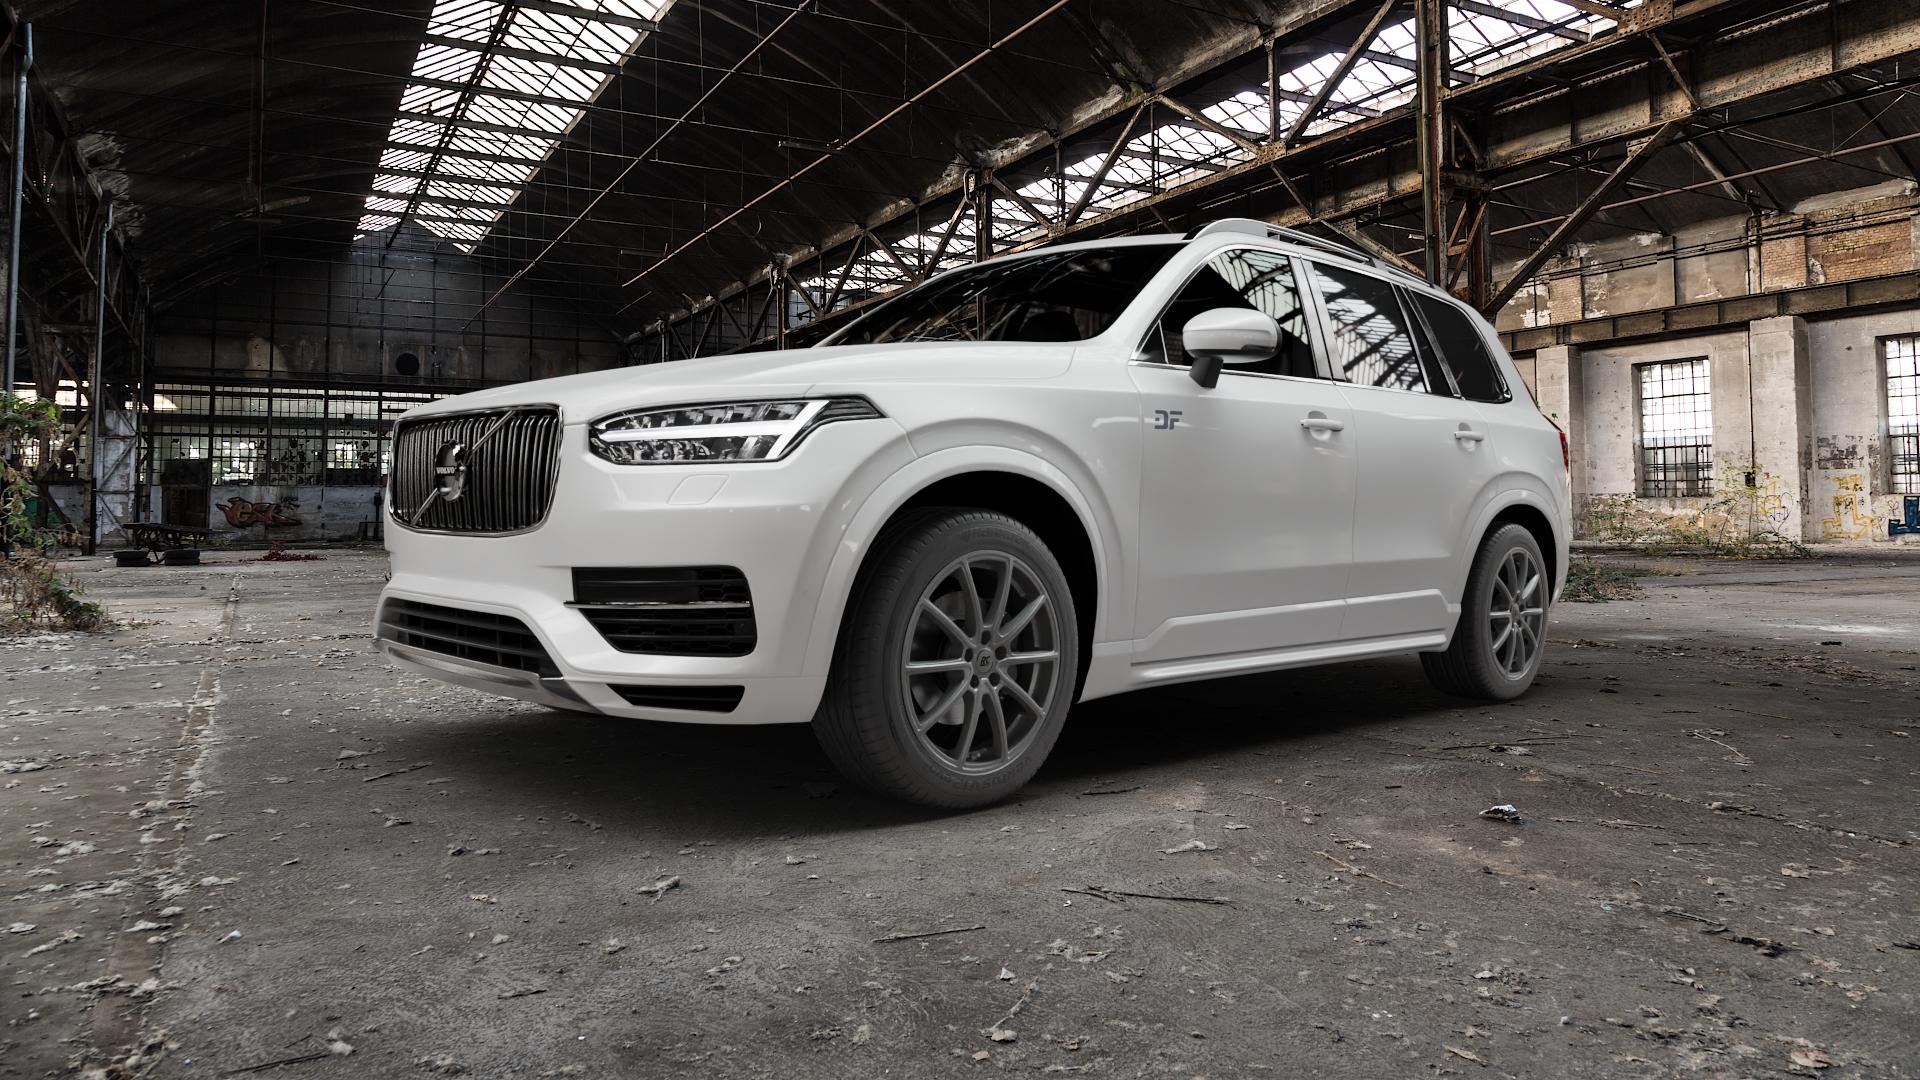 Volvo XC90 II Type L 2,0l T8 Twin Engine AWD 235kW Hybrid (320 hp) Wheels  and Tyre Packages | velonity.com